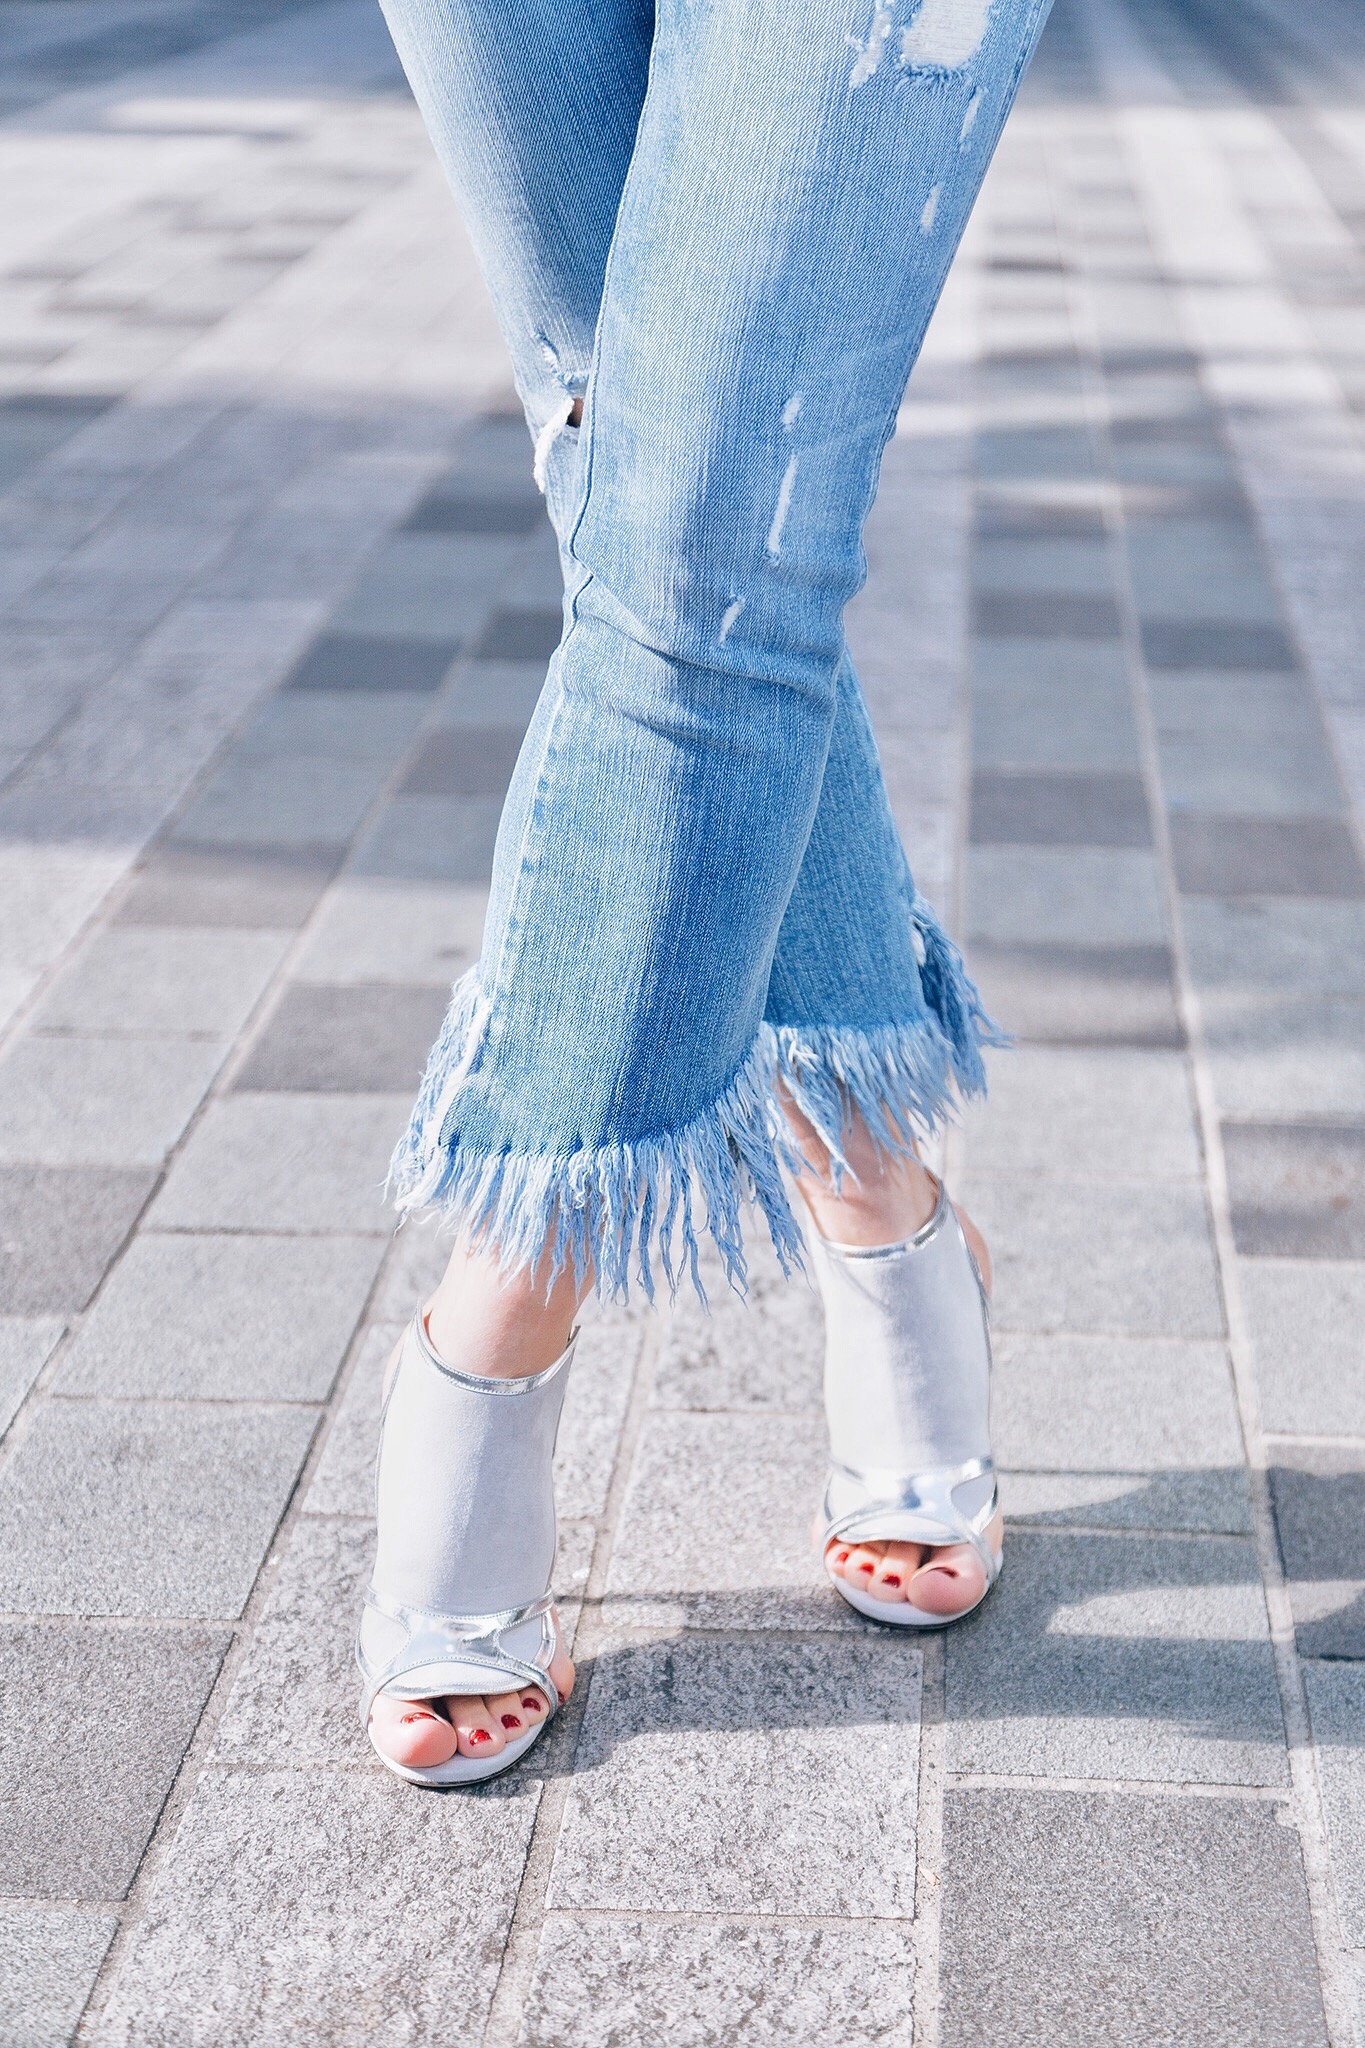 How to wear fringe jeans